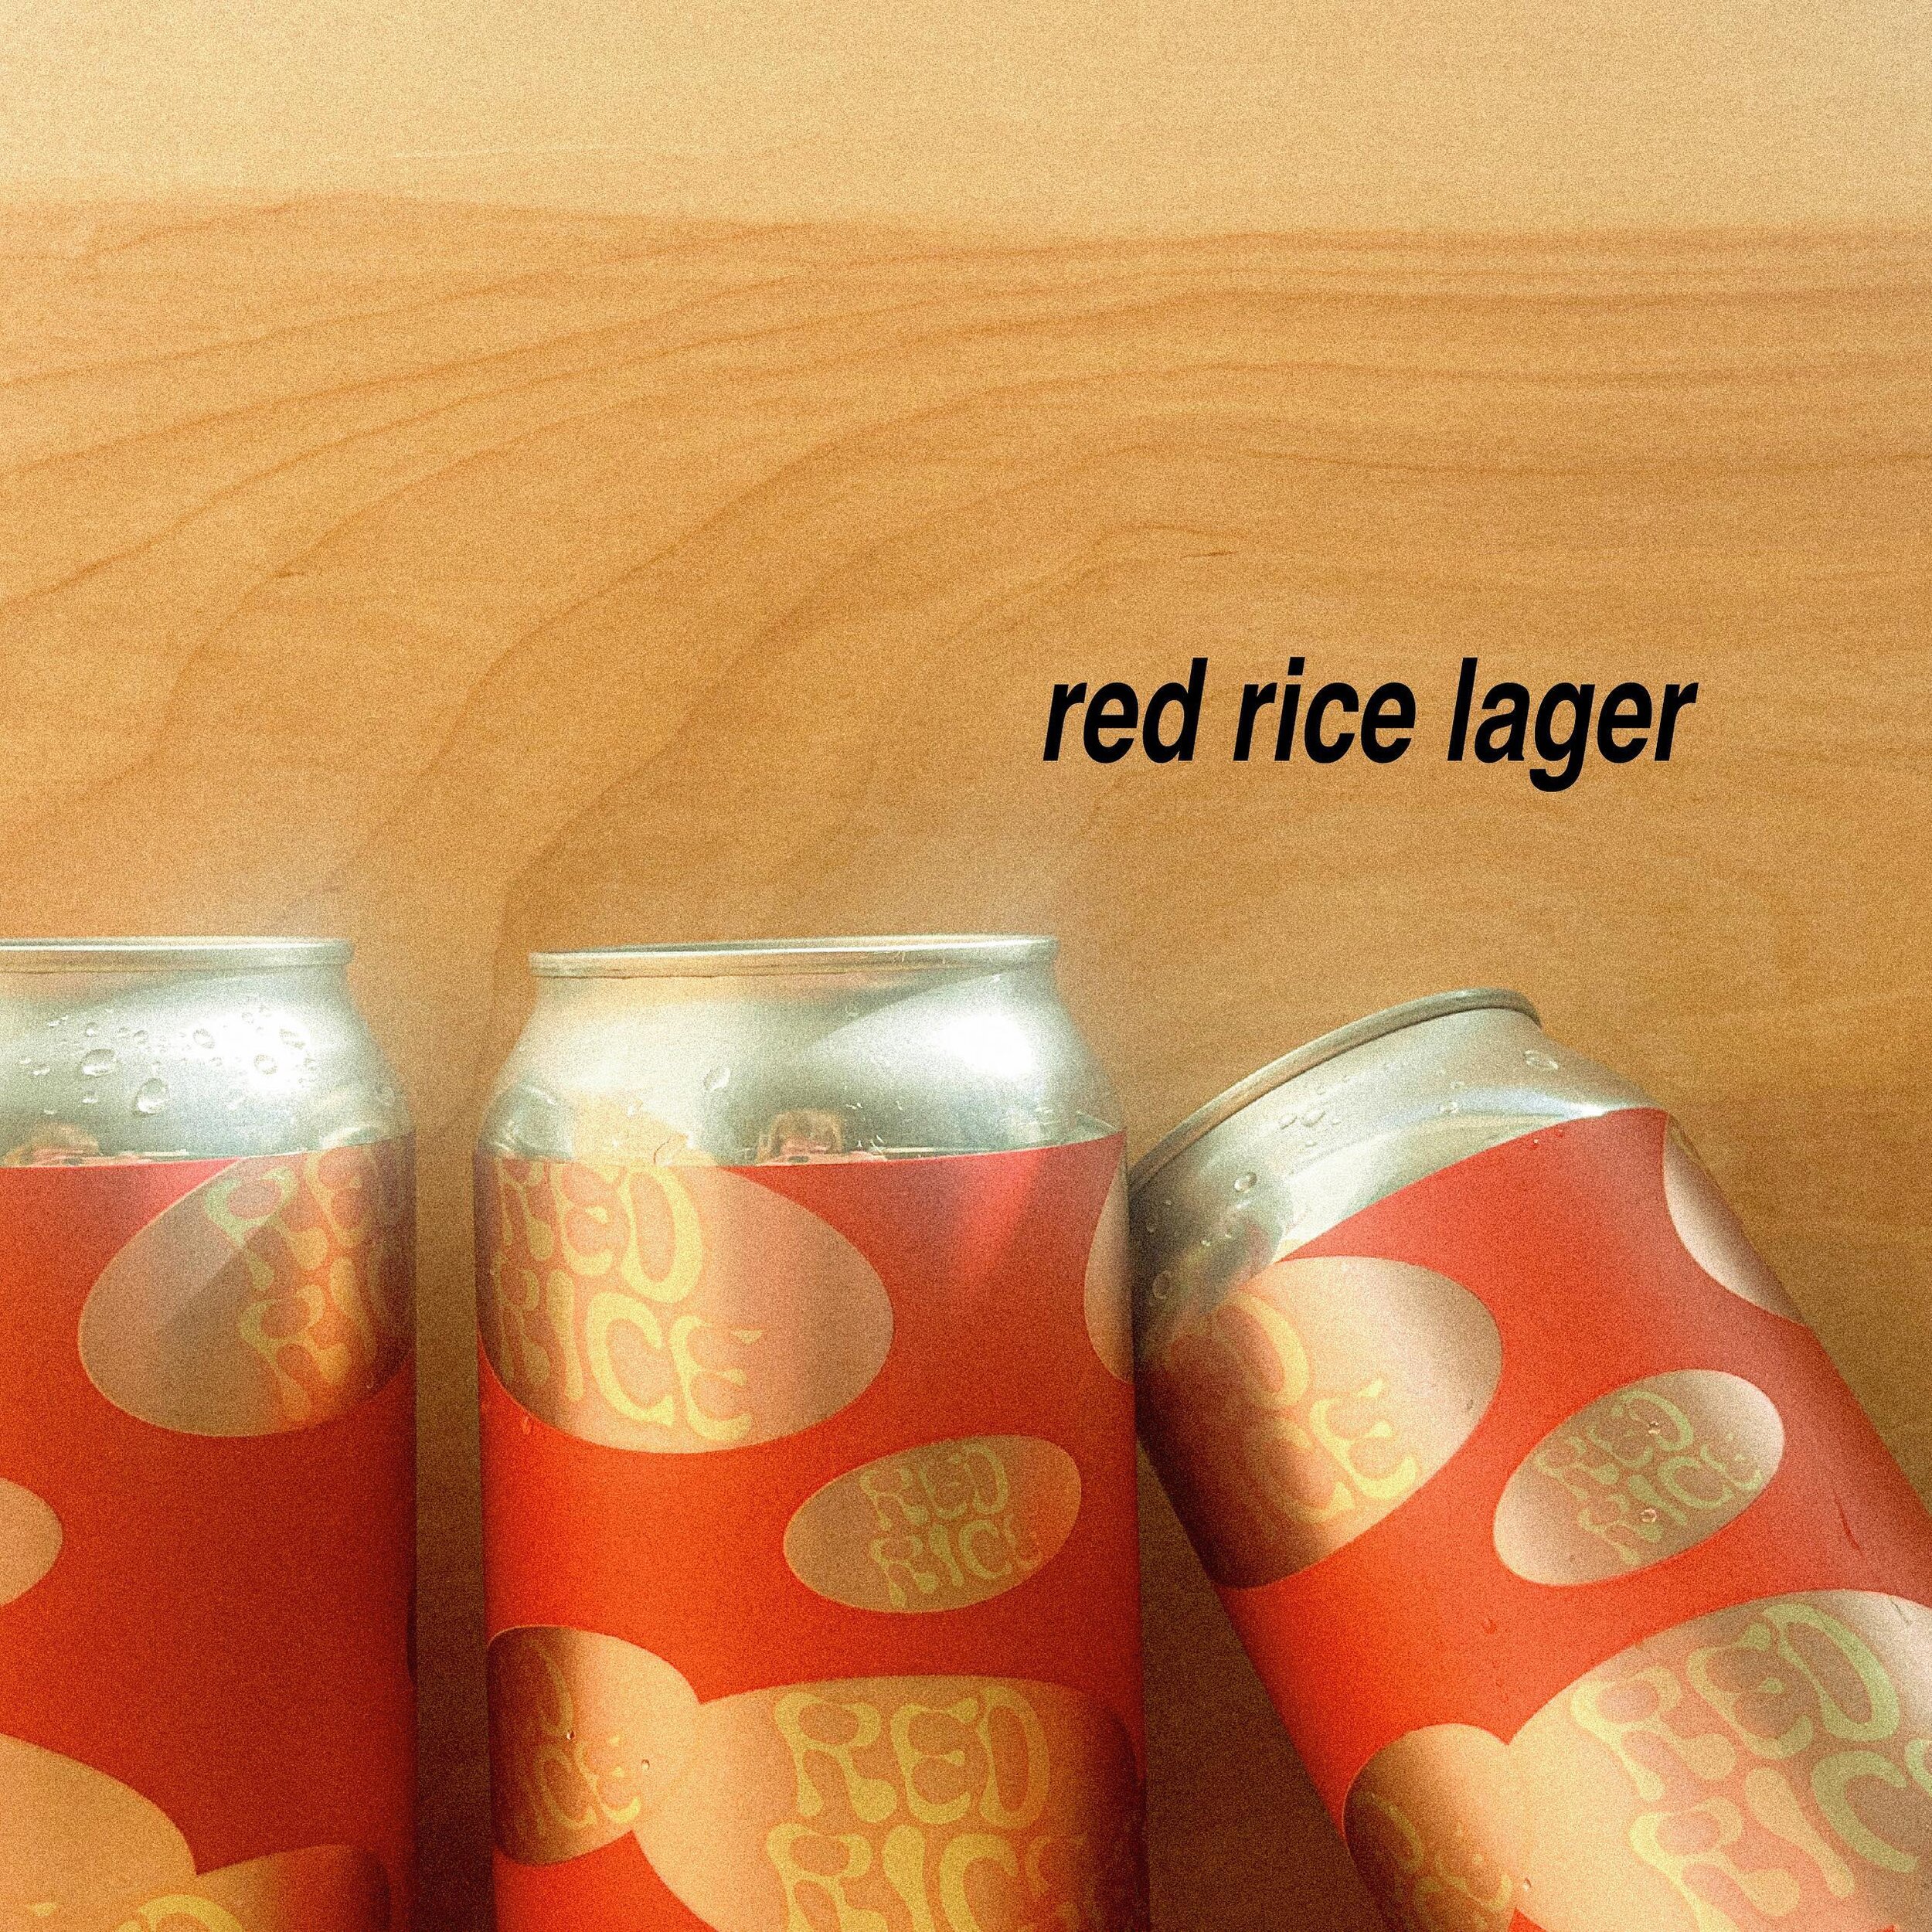 RED RICE LAGER

a new beer! what a day! and it&rsquo;s a lager ! 

a Japanese inspired lager brewed up with hallertau blanc hops and rice, which adds a nice subtle sweetness. it&rsquo;s light and crispy and perfect for this spring weather coming our 